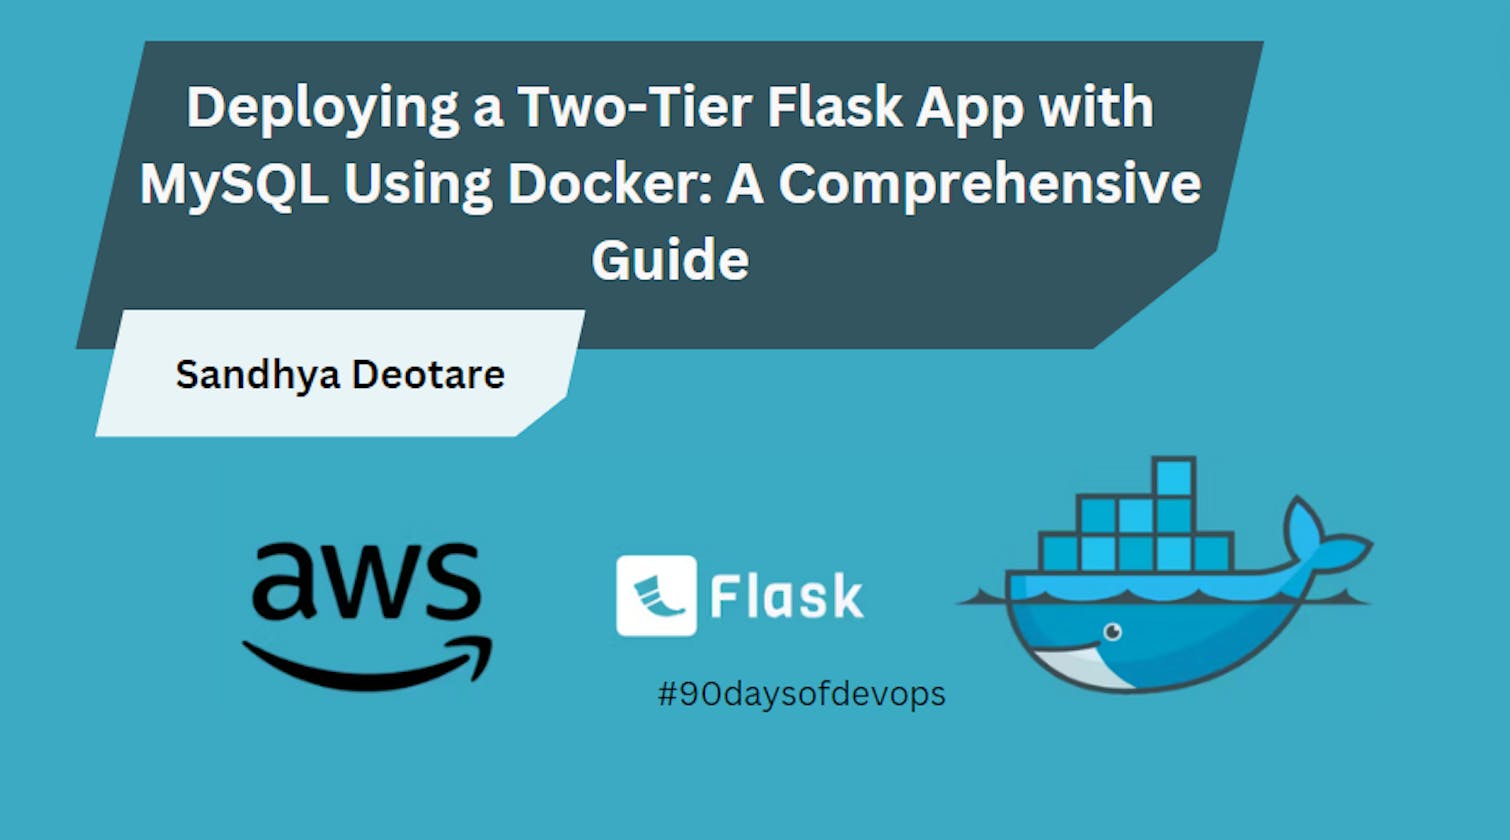 Deploying a Two-Tier Flask App with MySQL Using Docker: A Comprehensive Guide